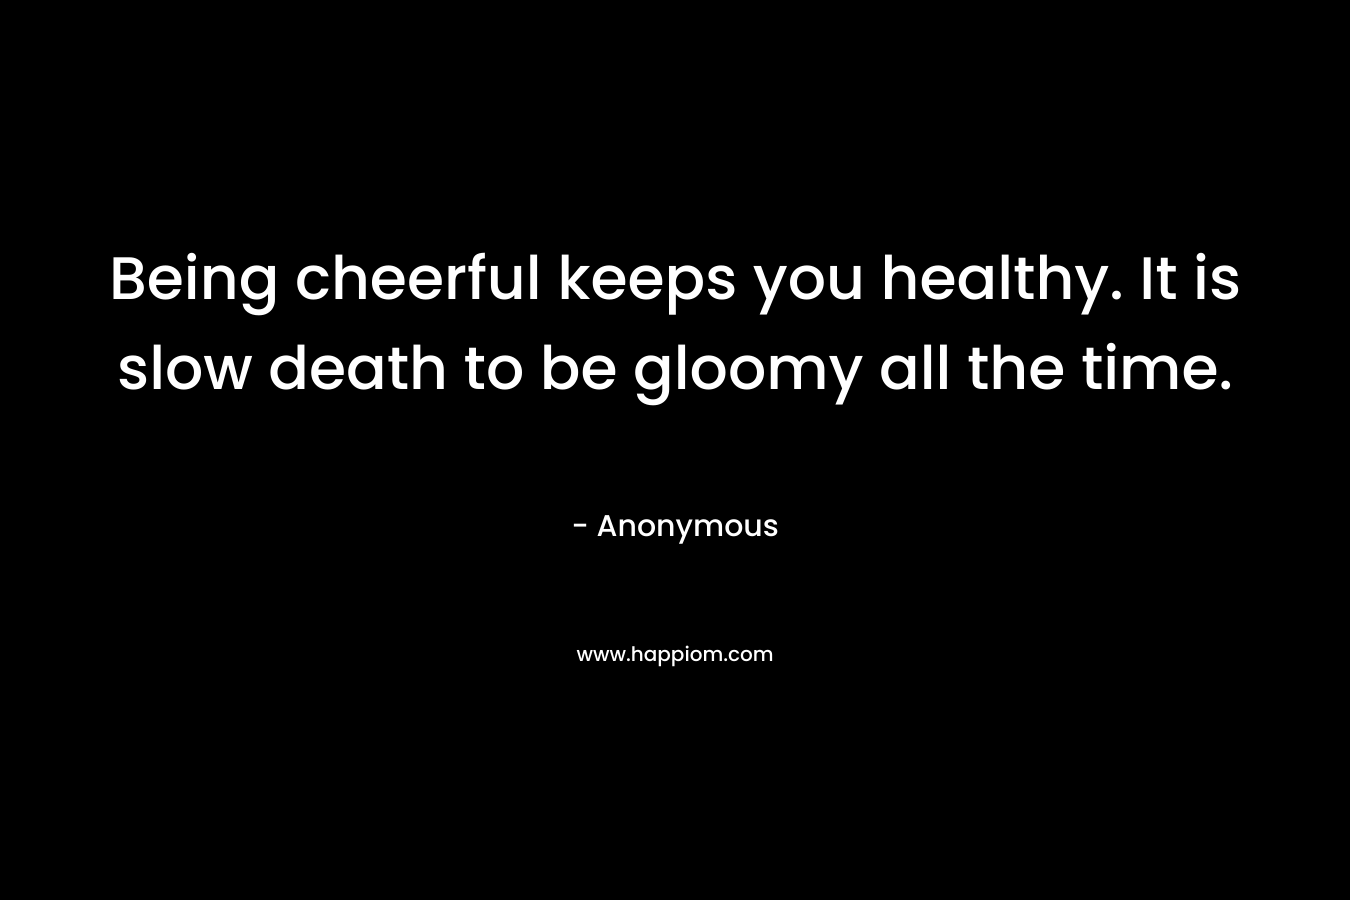 Being cheerful keeps you healthy. It is slow death to be gloomy all the time.